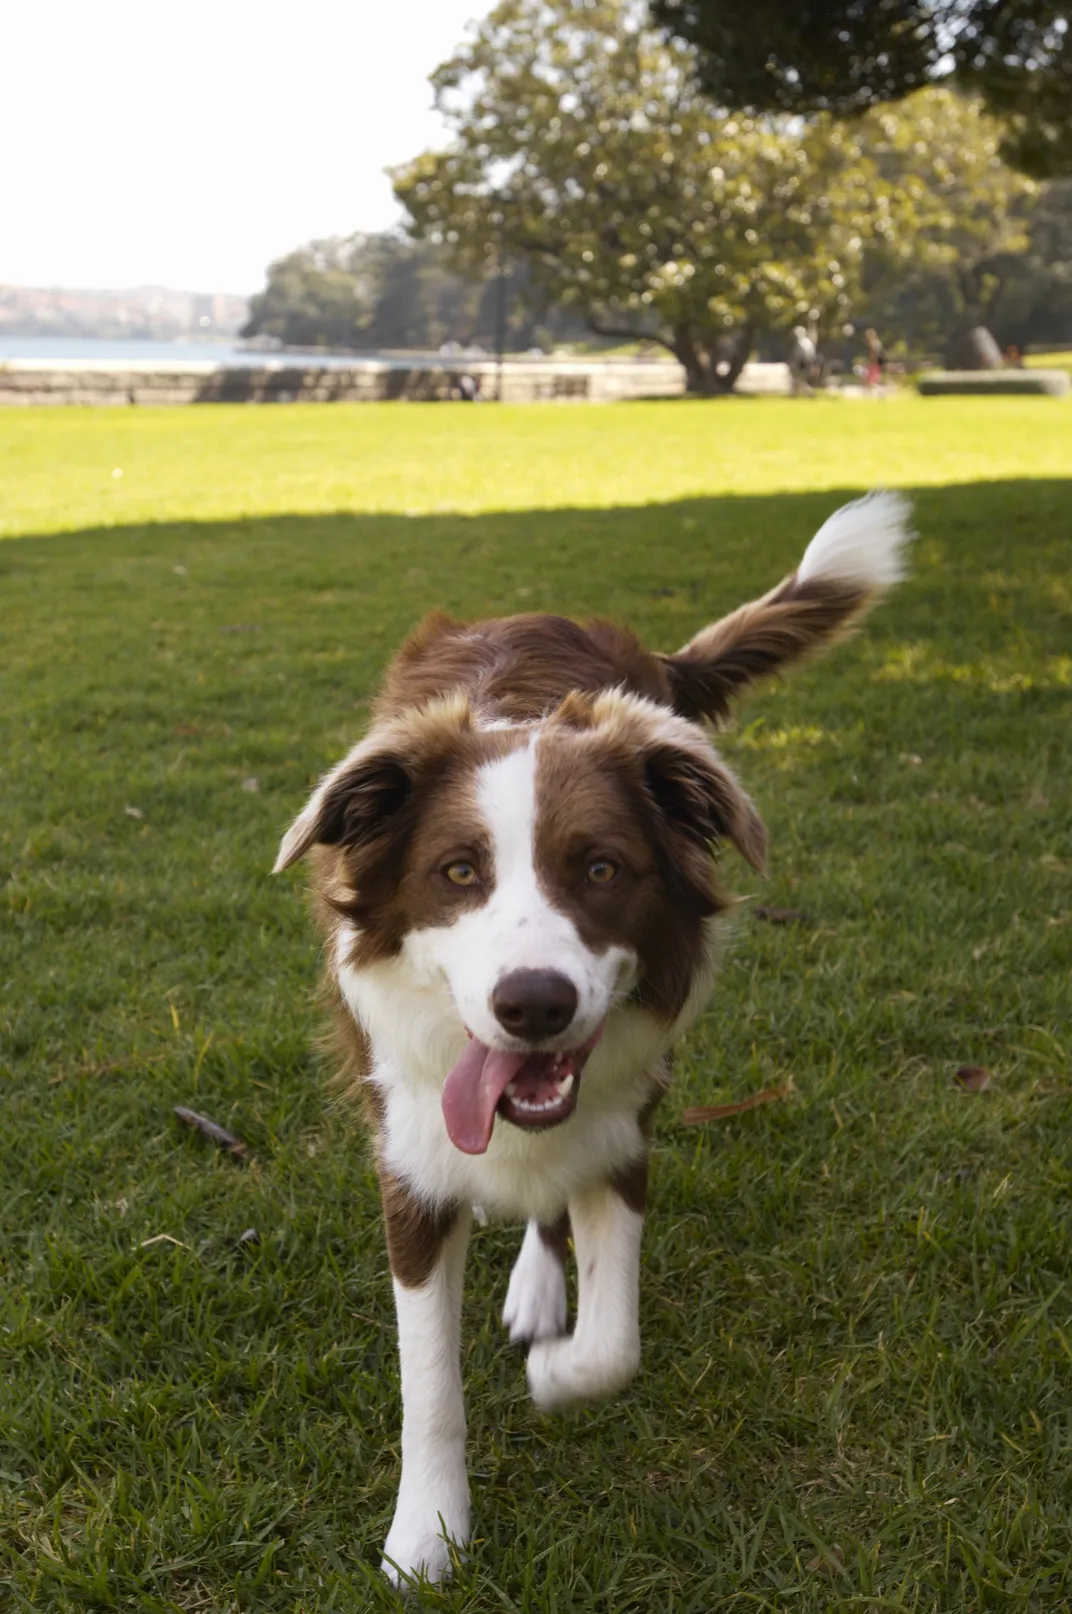 brown and white border collie walking toward the camera through grass, its tongue lolling and tail raised to the side